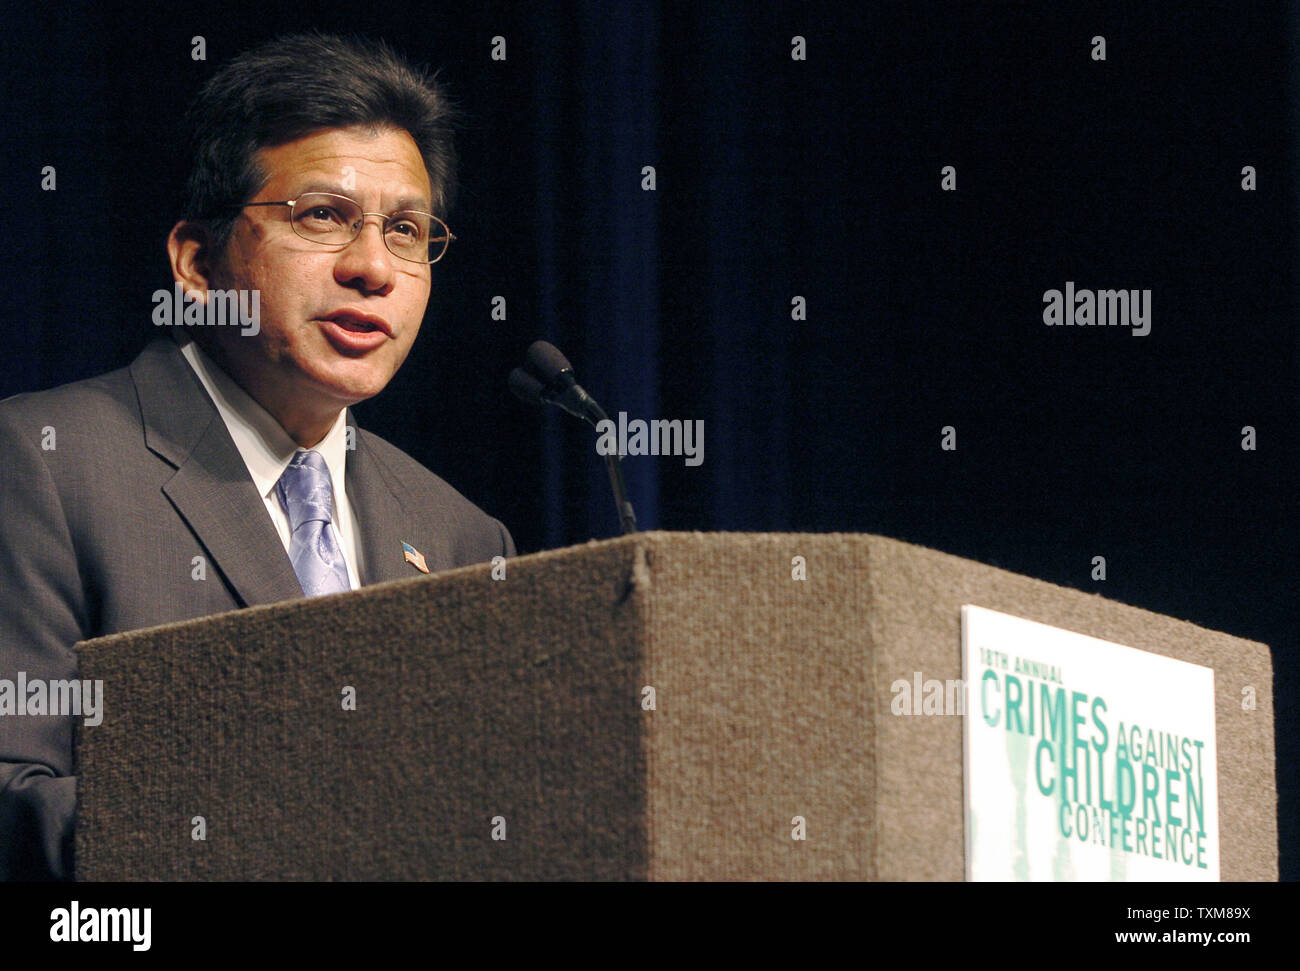 United States Attorney General Alberto R. Gonzales gives the opening address at the 8th Annual Crimes Against Children Conference on August 21, 2006 in Dallas, TX.  The event is billed as the Nation's foremost conference on responding to the victimization of children.  (UPI Photo/Ian Halperin) Stock Photo